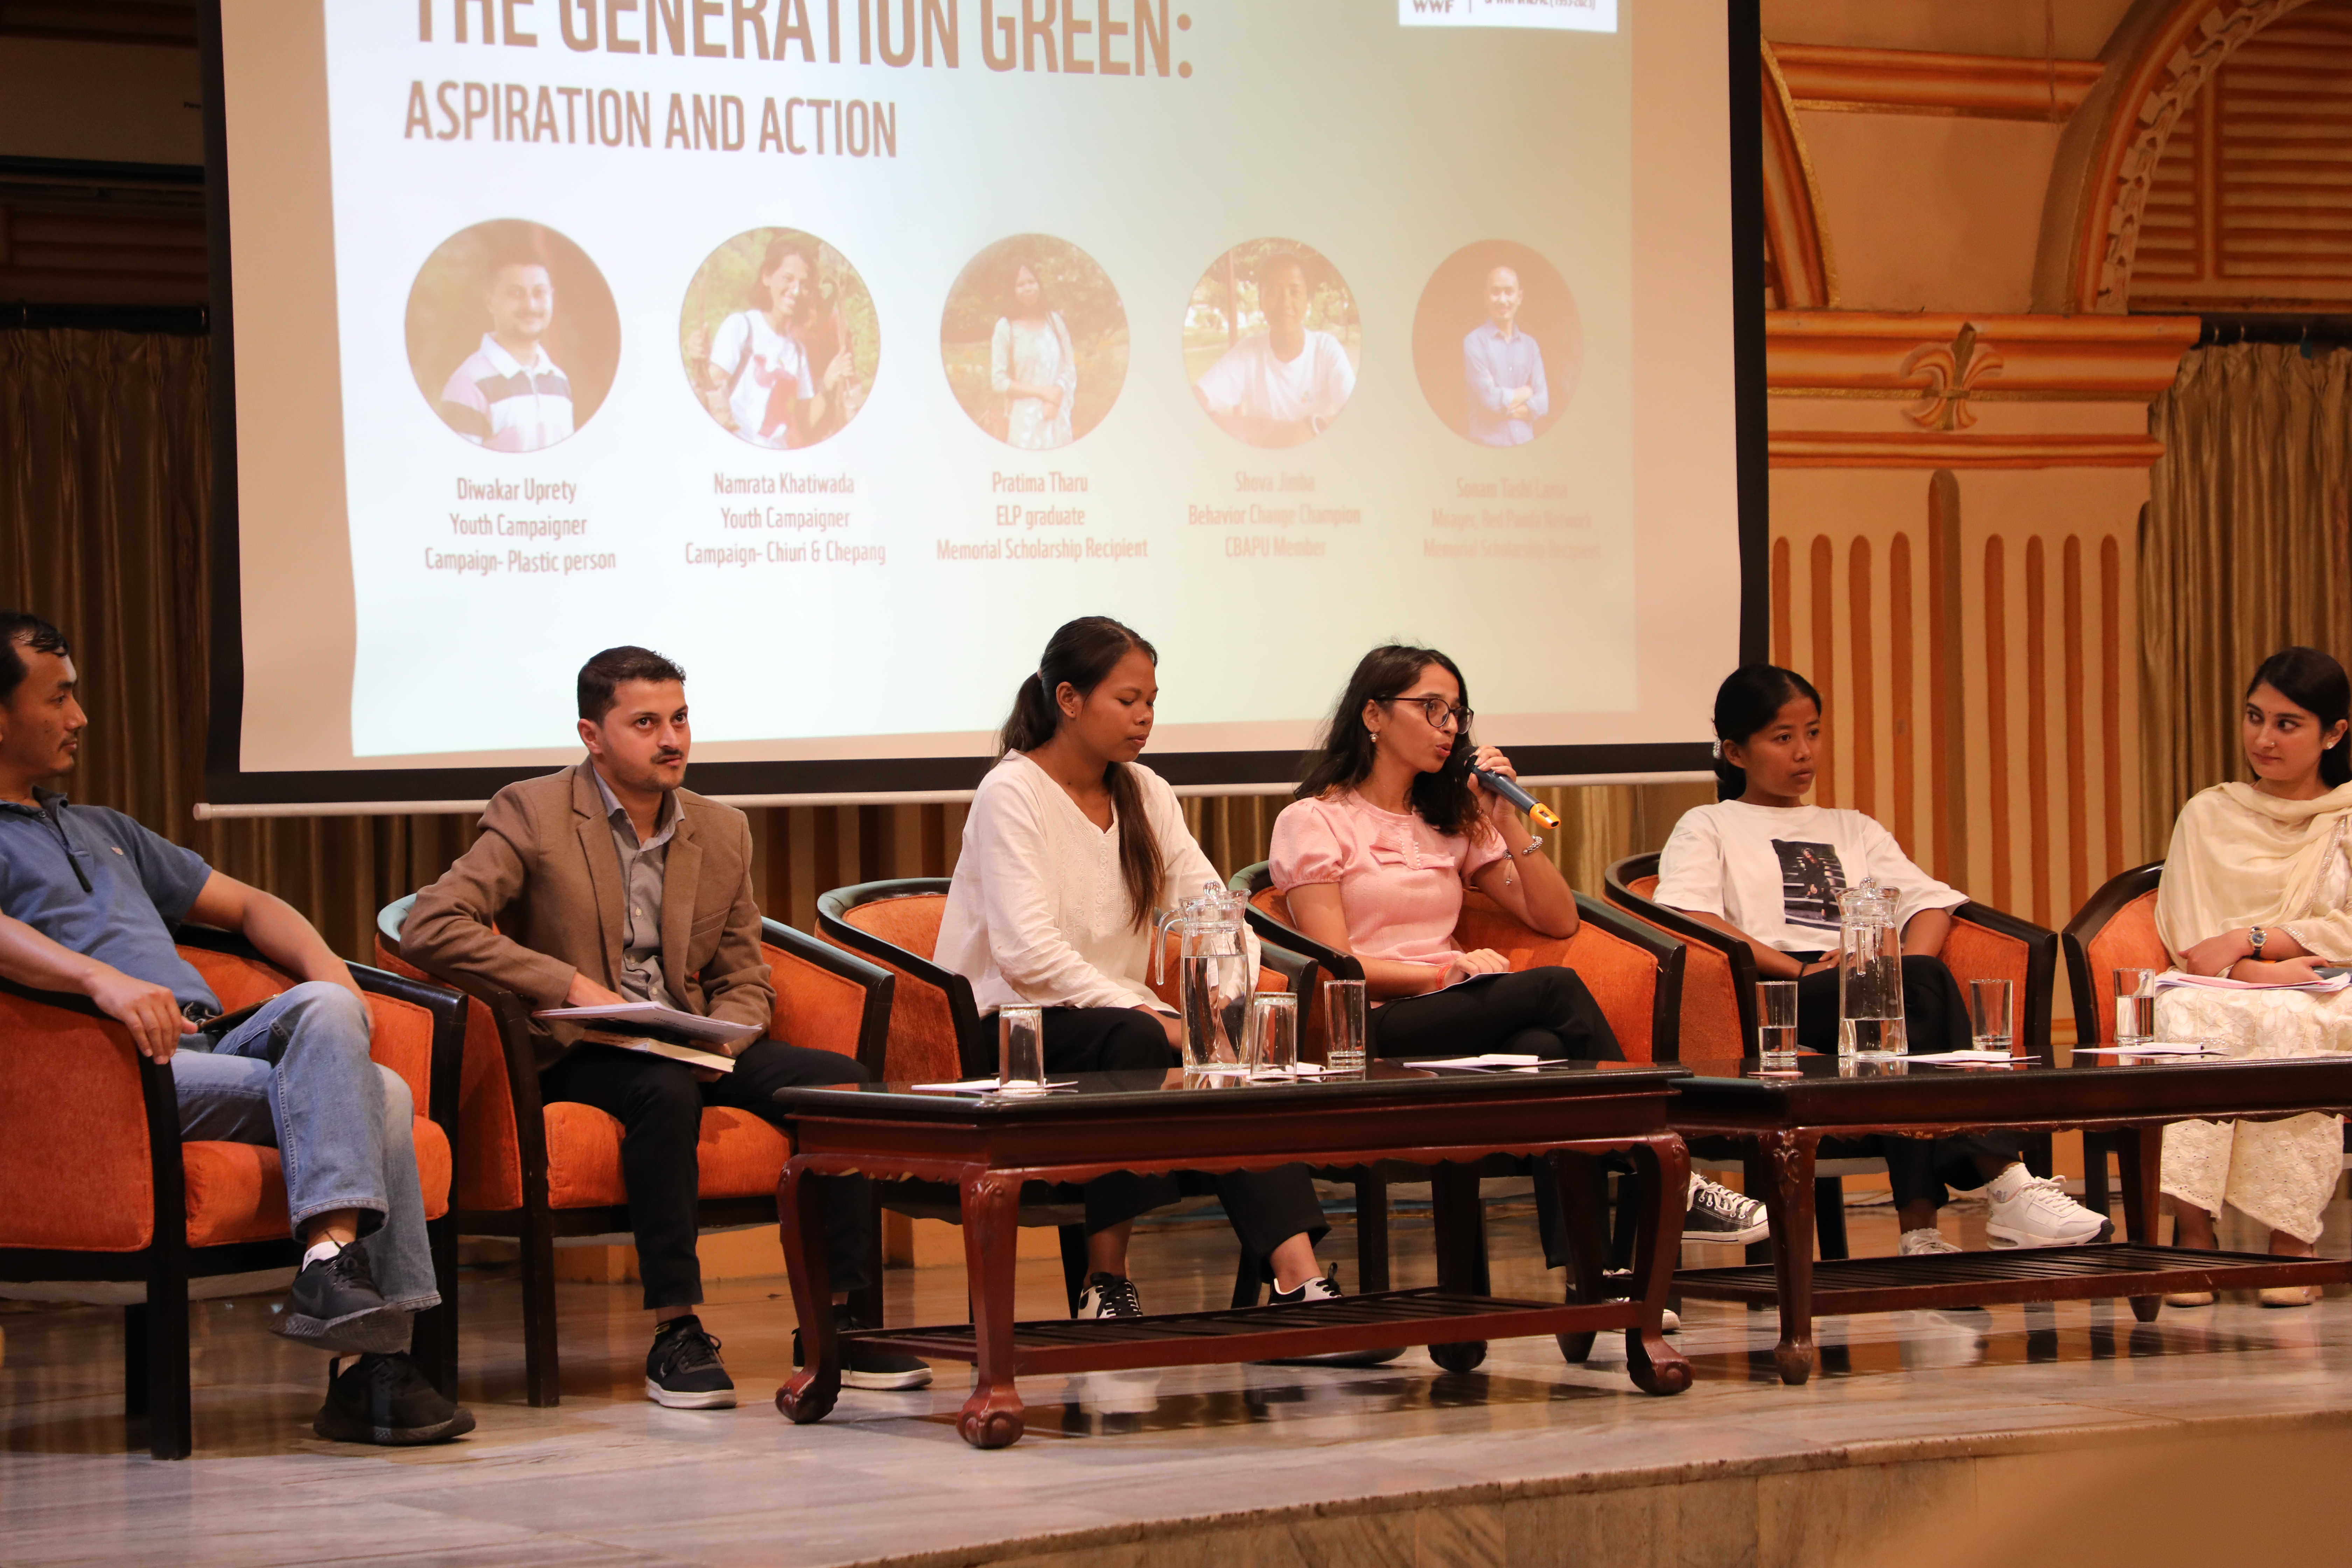 WWF Nepal organizes 'The Generation Green: Aspiration and Action'